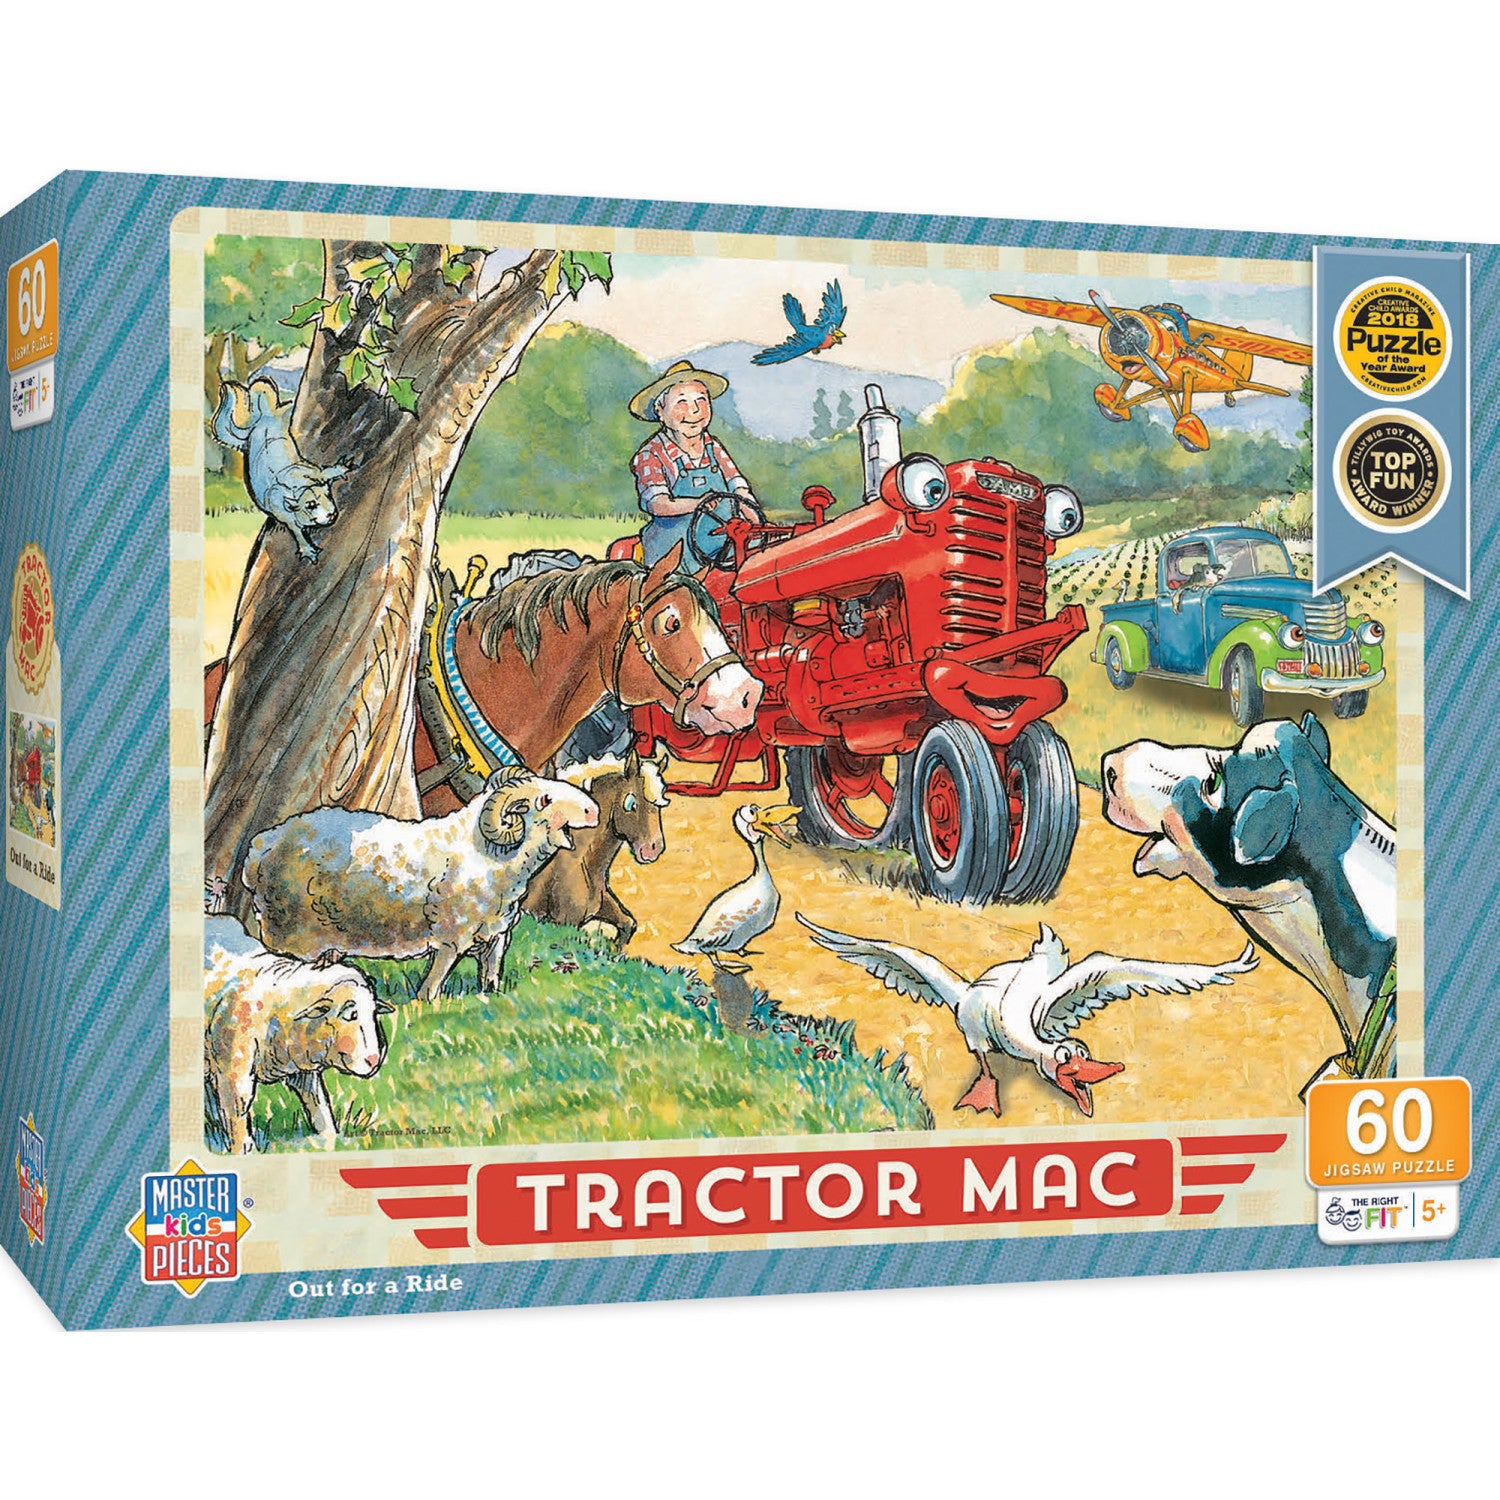 Tractor Mac - Out for a Ride 60 Piece Jigsaw Puzzle